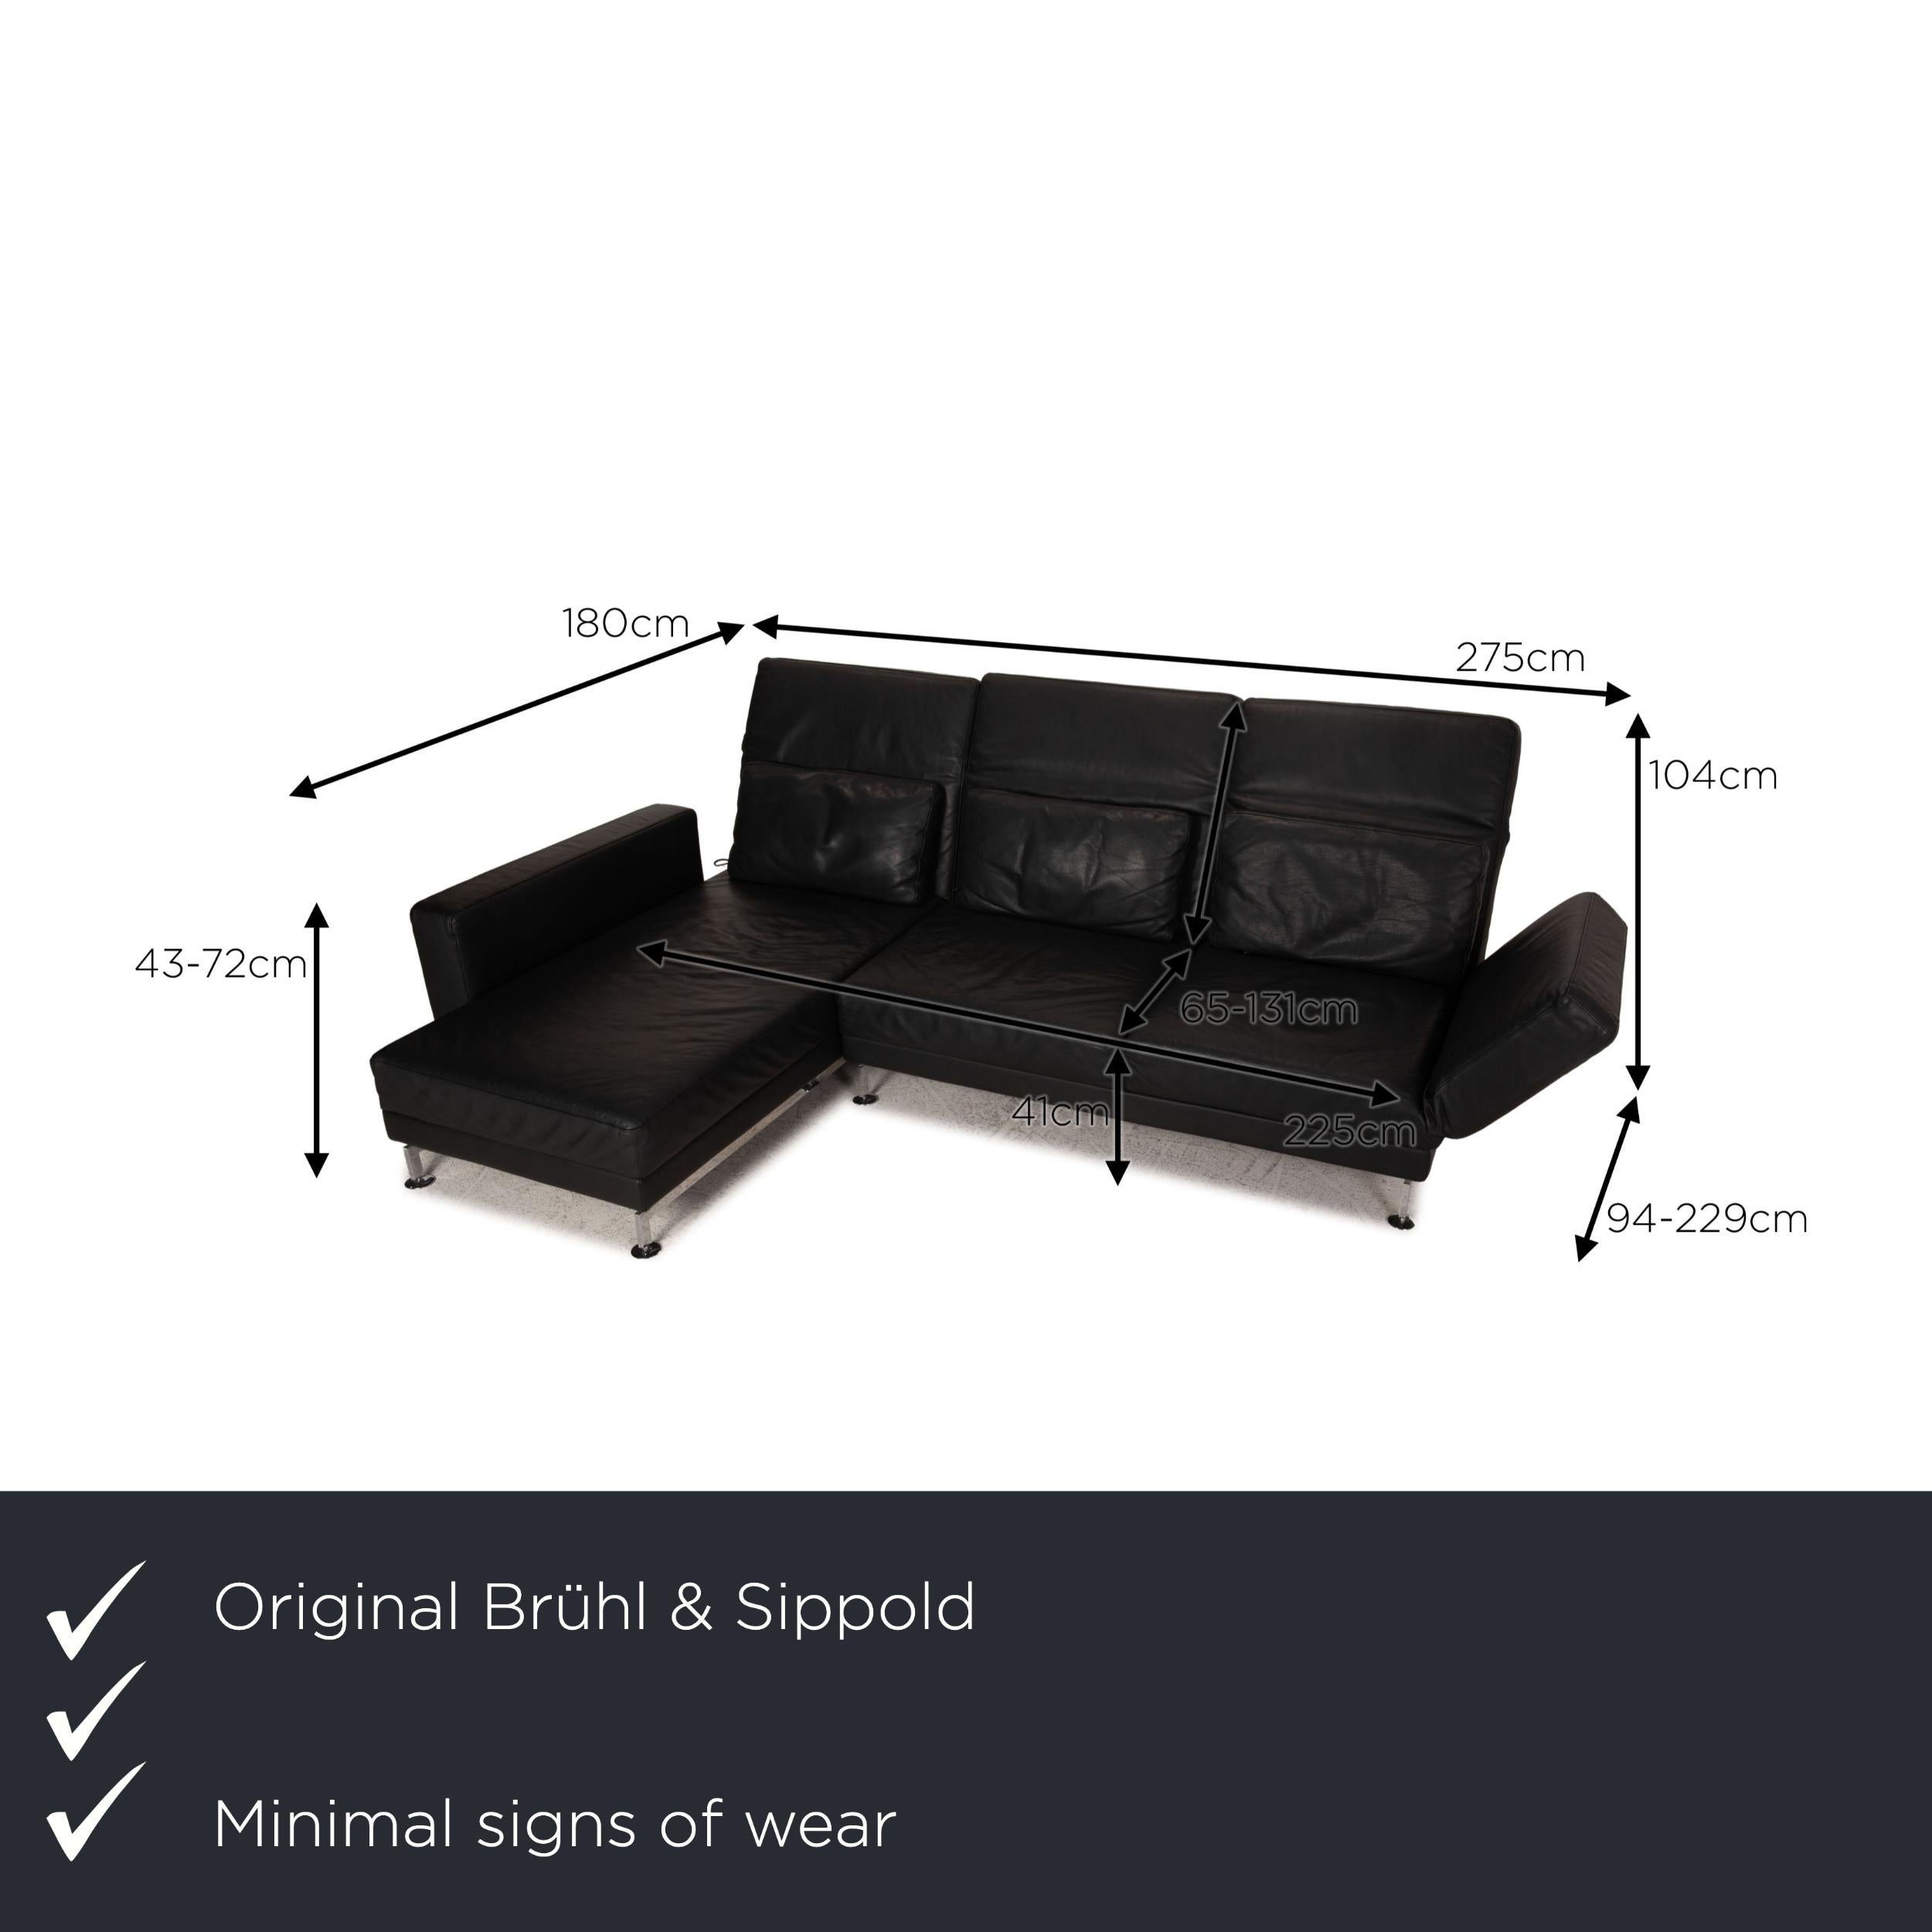 We present to you a Brühl & Sippold Moule leather sofa black corner sofa Couch function.

Product measurements in centimeters:

depth: 180
width: 180
height: 104
seat height: 41
rest height: 43
seat depth: 131
seat width: 225
back height: